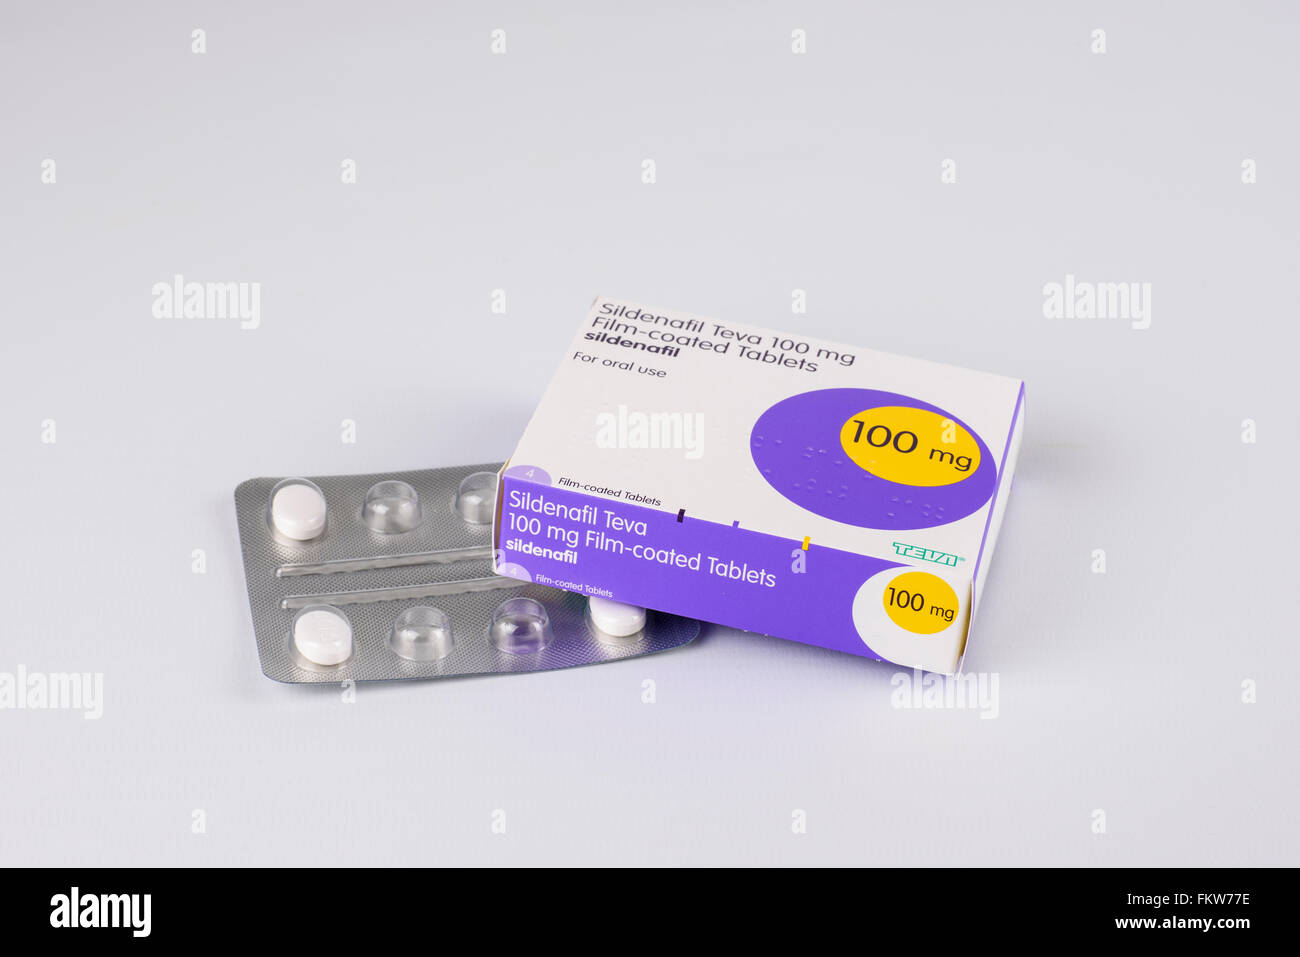 Packet of 100mg Sildenafil (generic Viagra) capsules against a white background Stock Photo